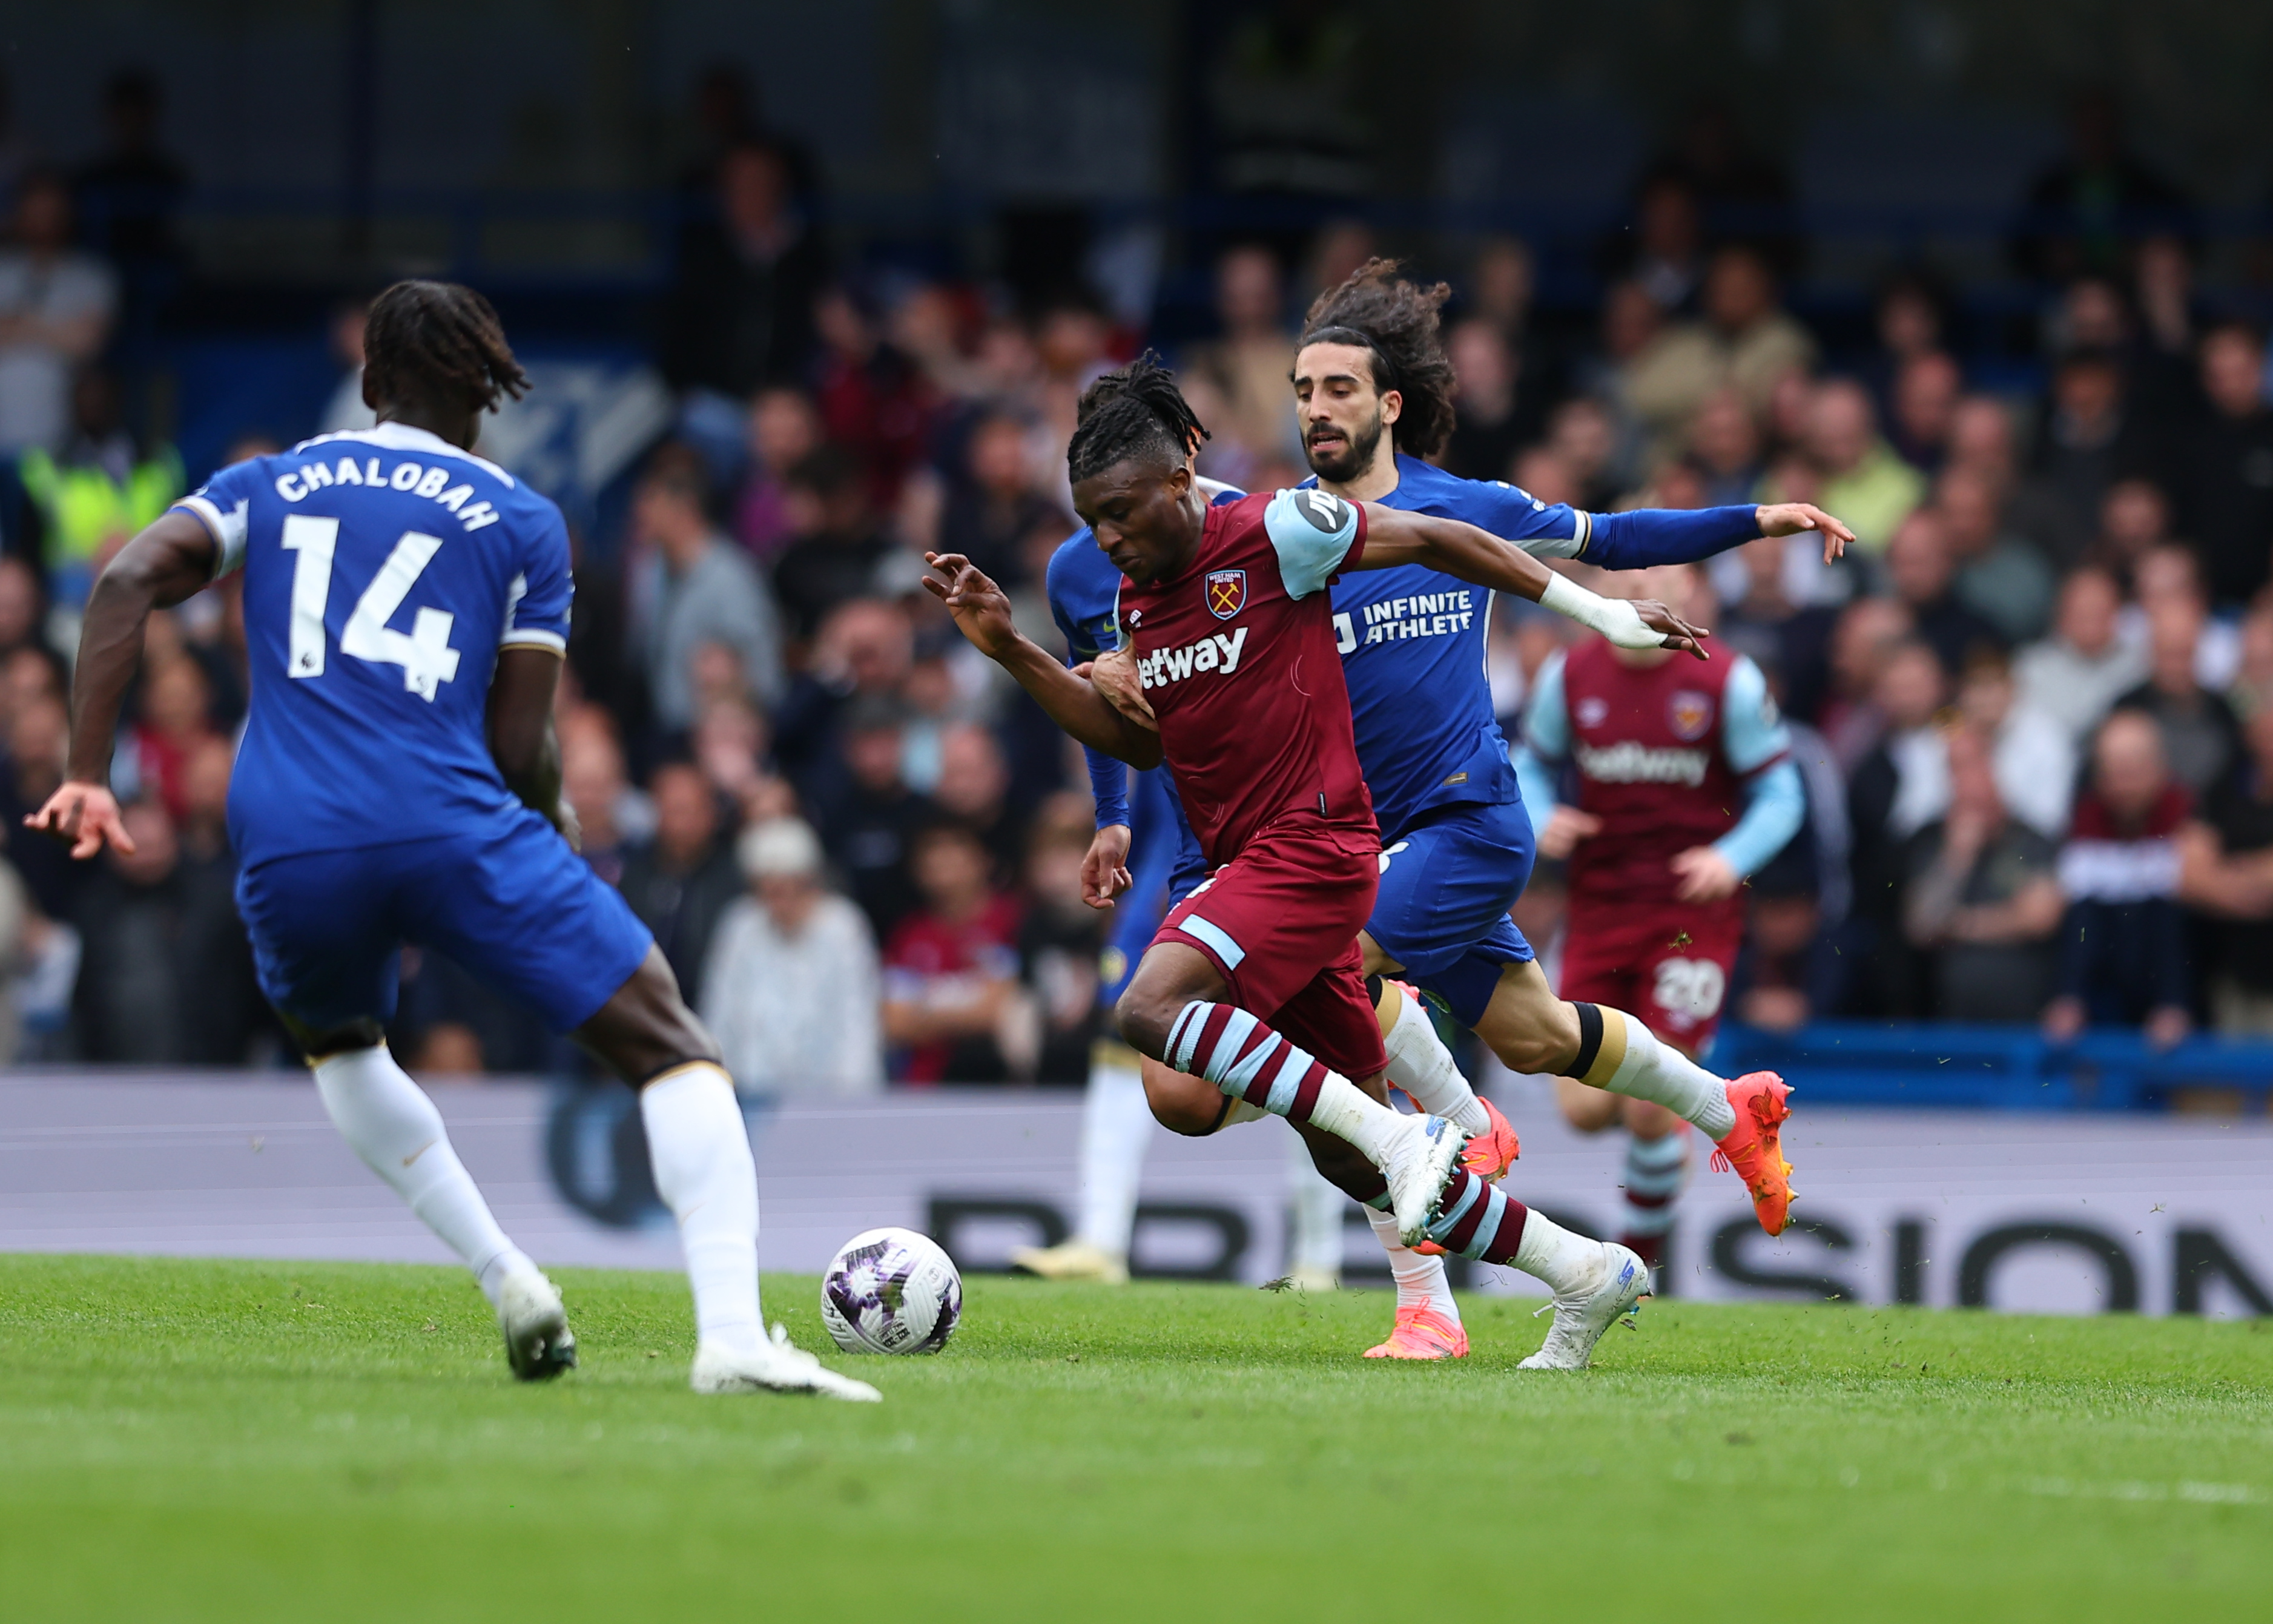 Kudus chalks Premier League dribbling record with performance against Chelsea